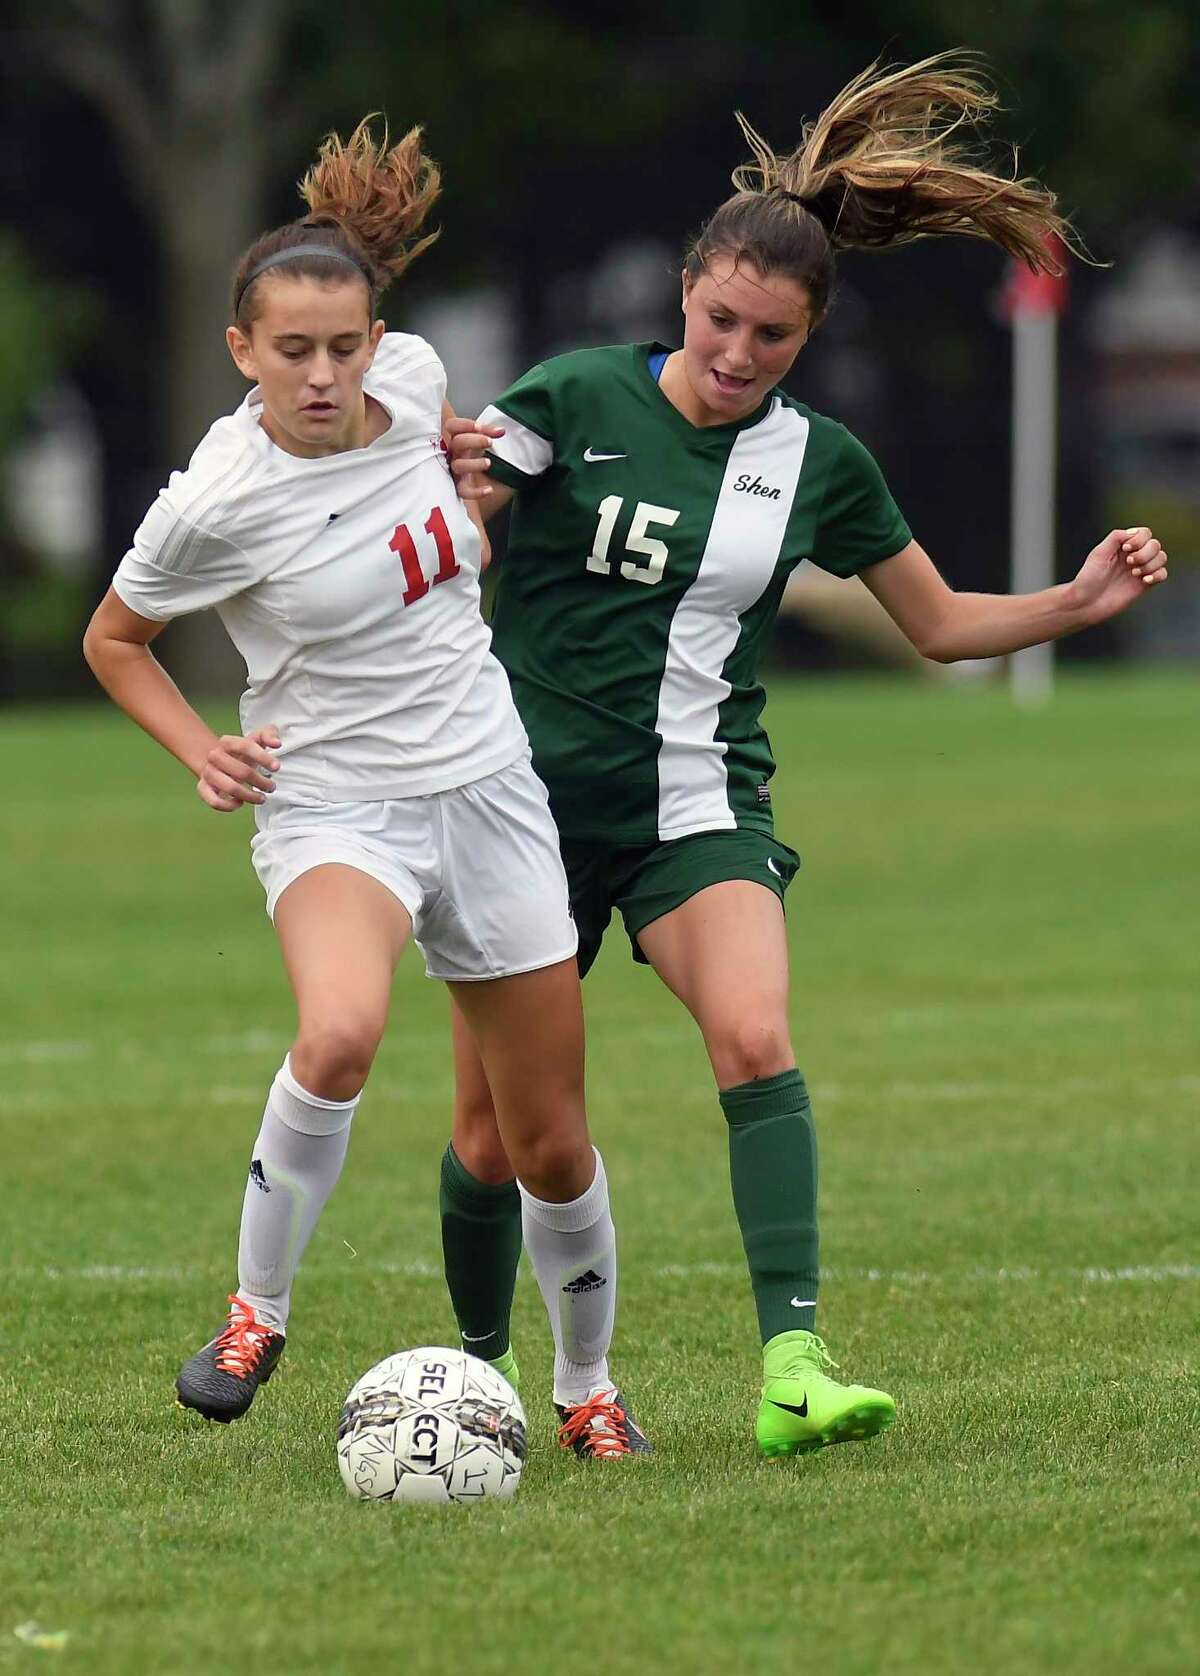 Niskayuna's Olivia Piraino (11) and Shenendehowa's Isabella Guarracino (15) battle for the ball during a Section II Class AA girls' high school soccer game in Niskayuna, N.Y., Tuesday, Sept. 5, 2017. (Hans Pennink / Special to the Times Union) ORG XMIT: HP110